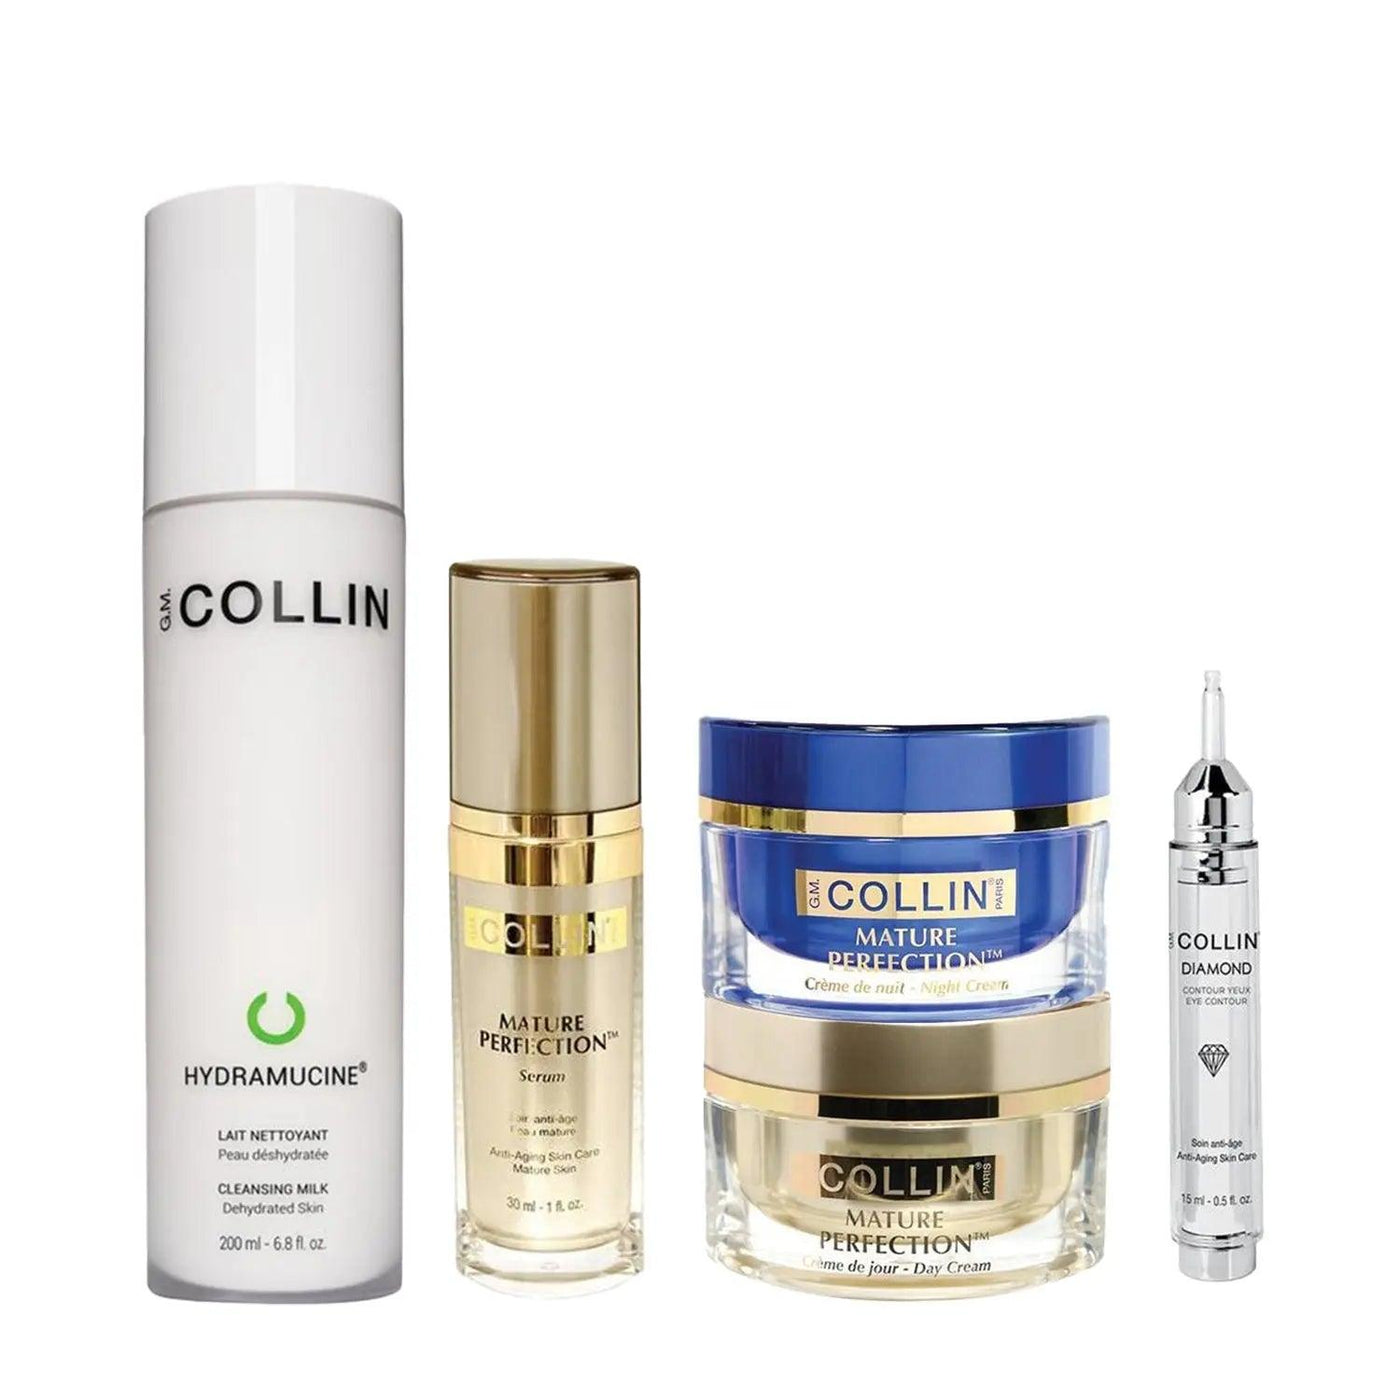 LIFTING & SMOOTHING BUNDLE FOR DRY SKIN (50+) G.M Collin Boutique Deauville